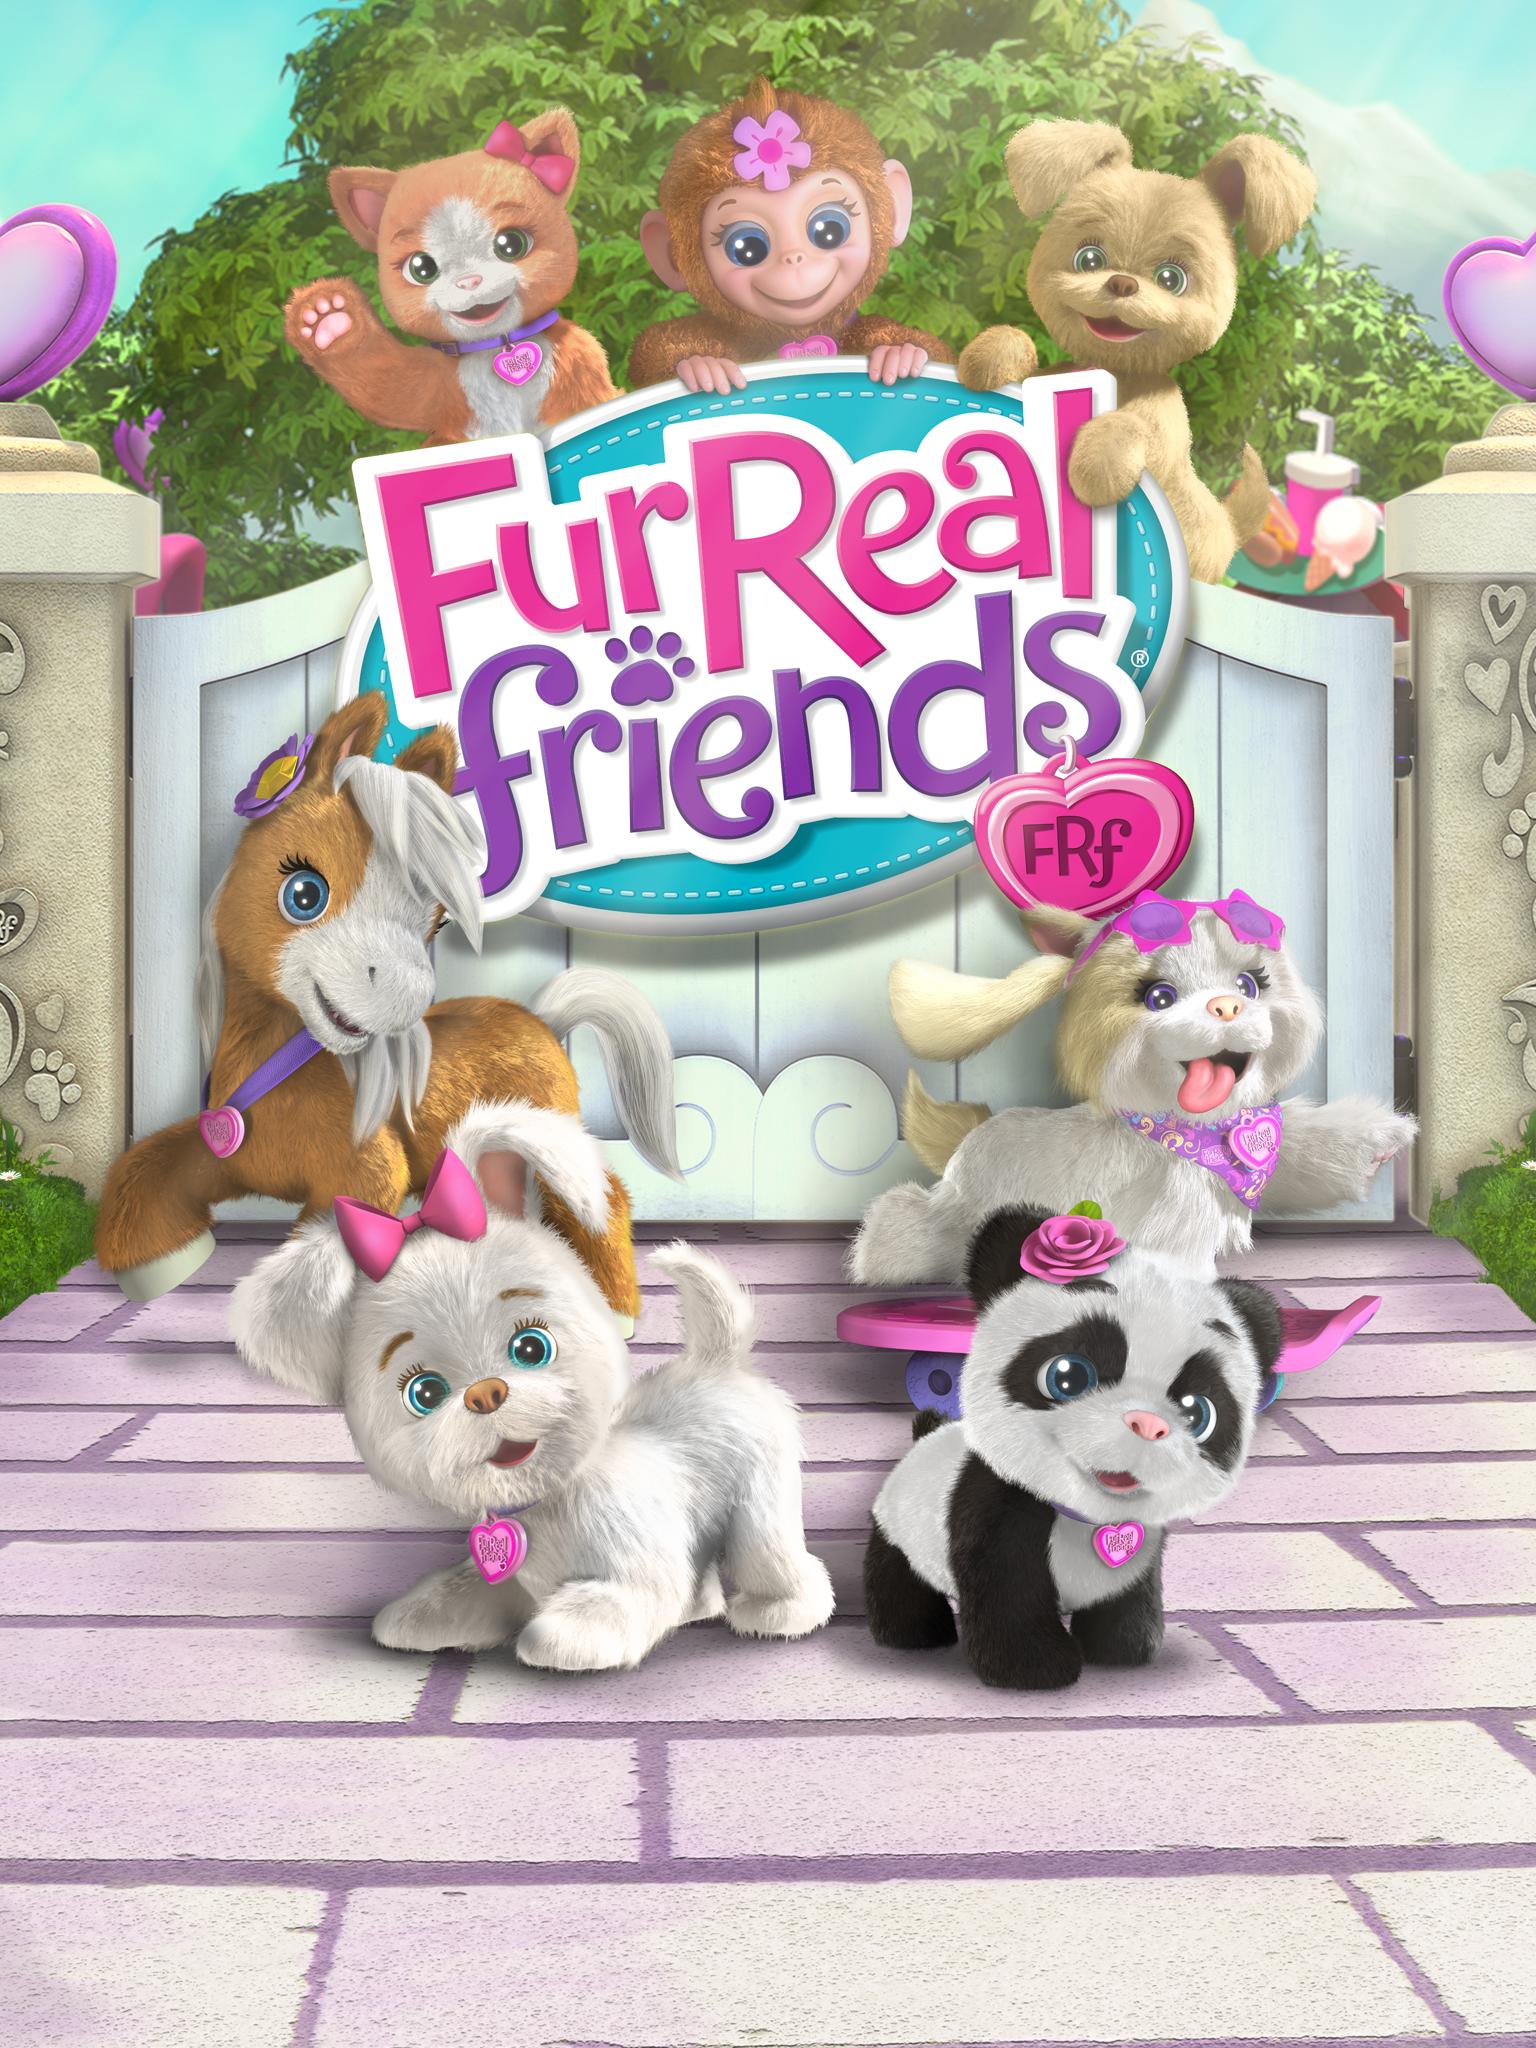 FurReal Friends GoGo for Android - APK Download